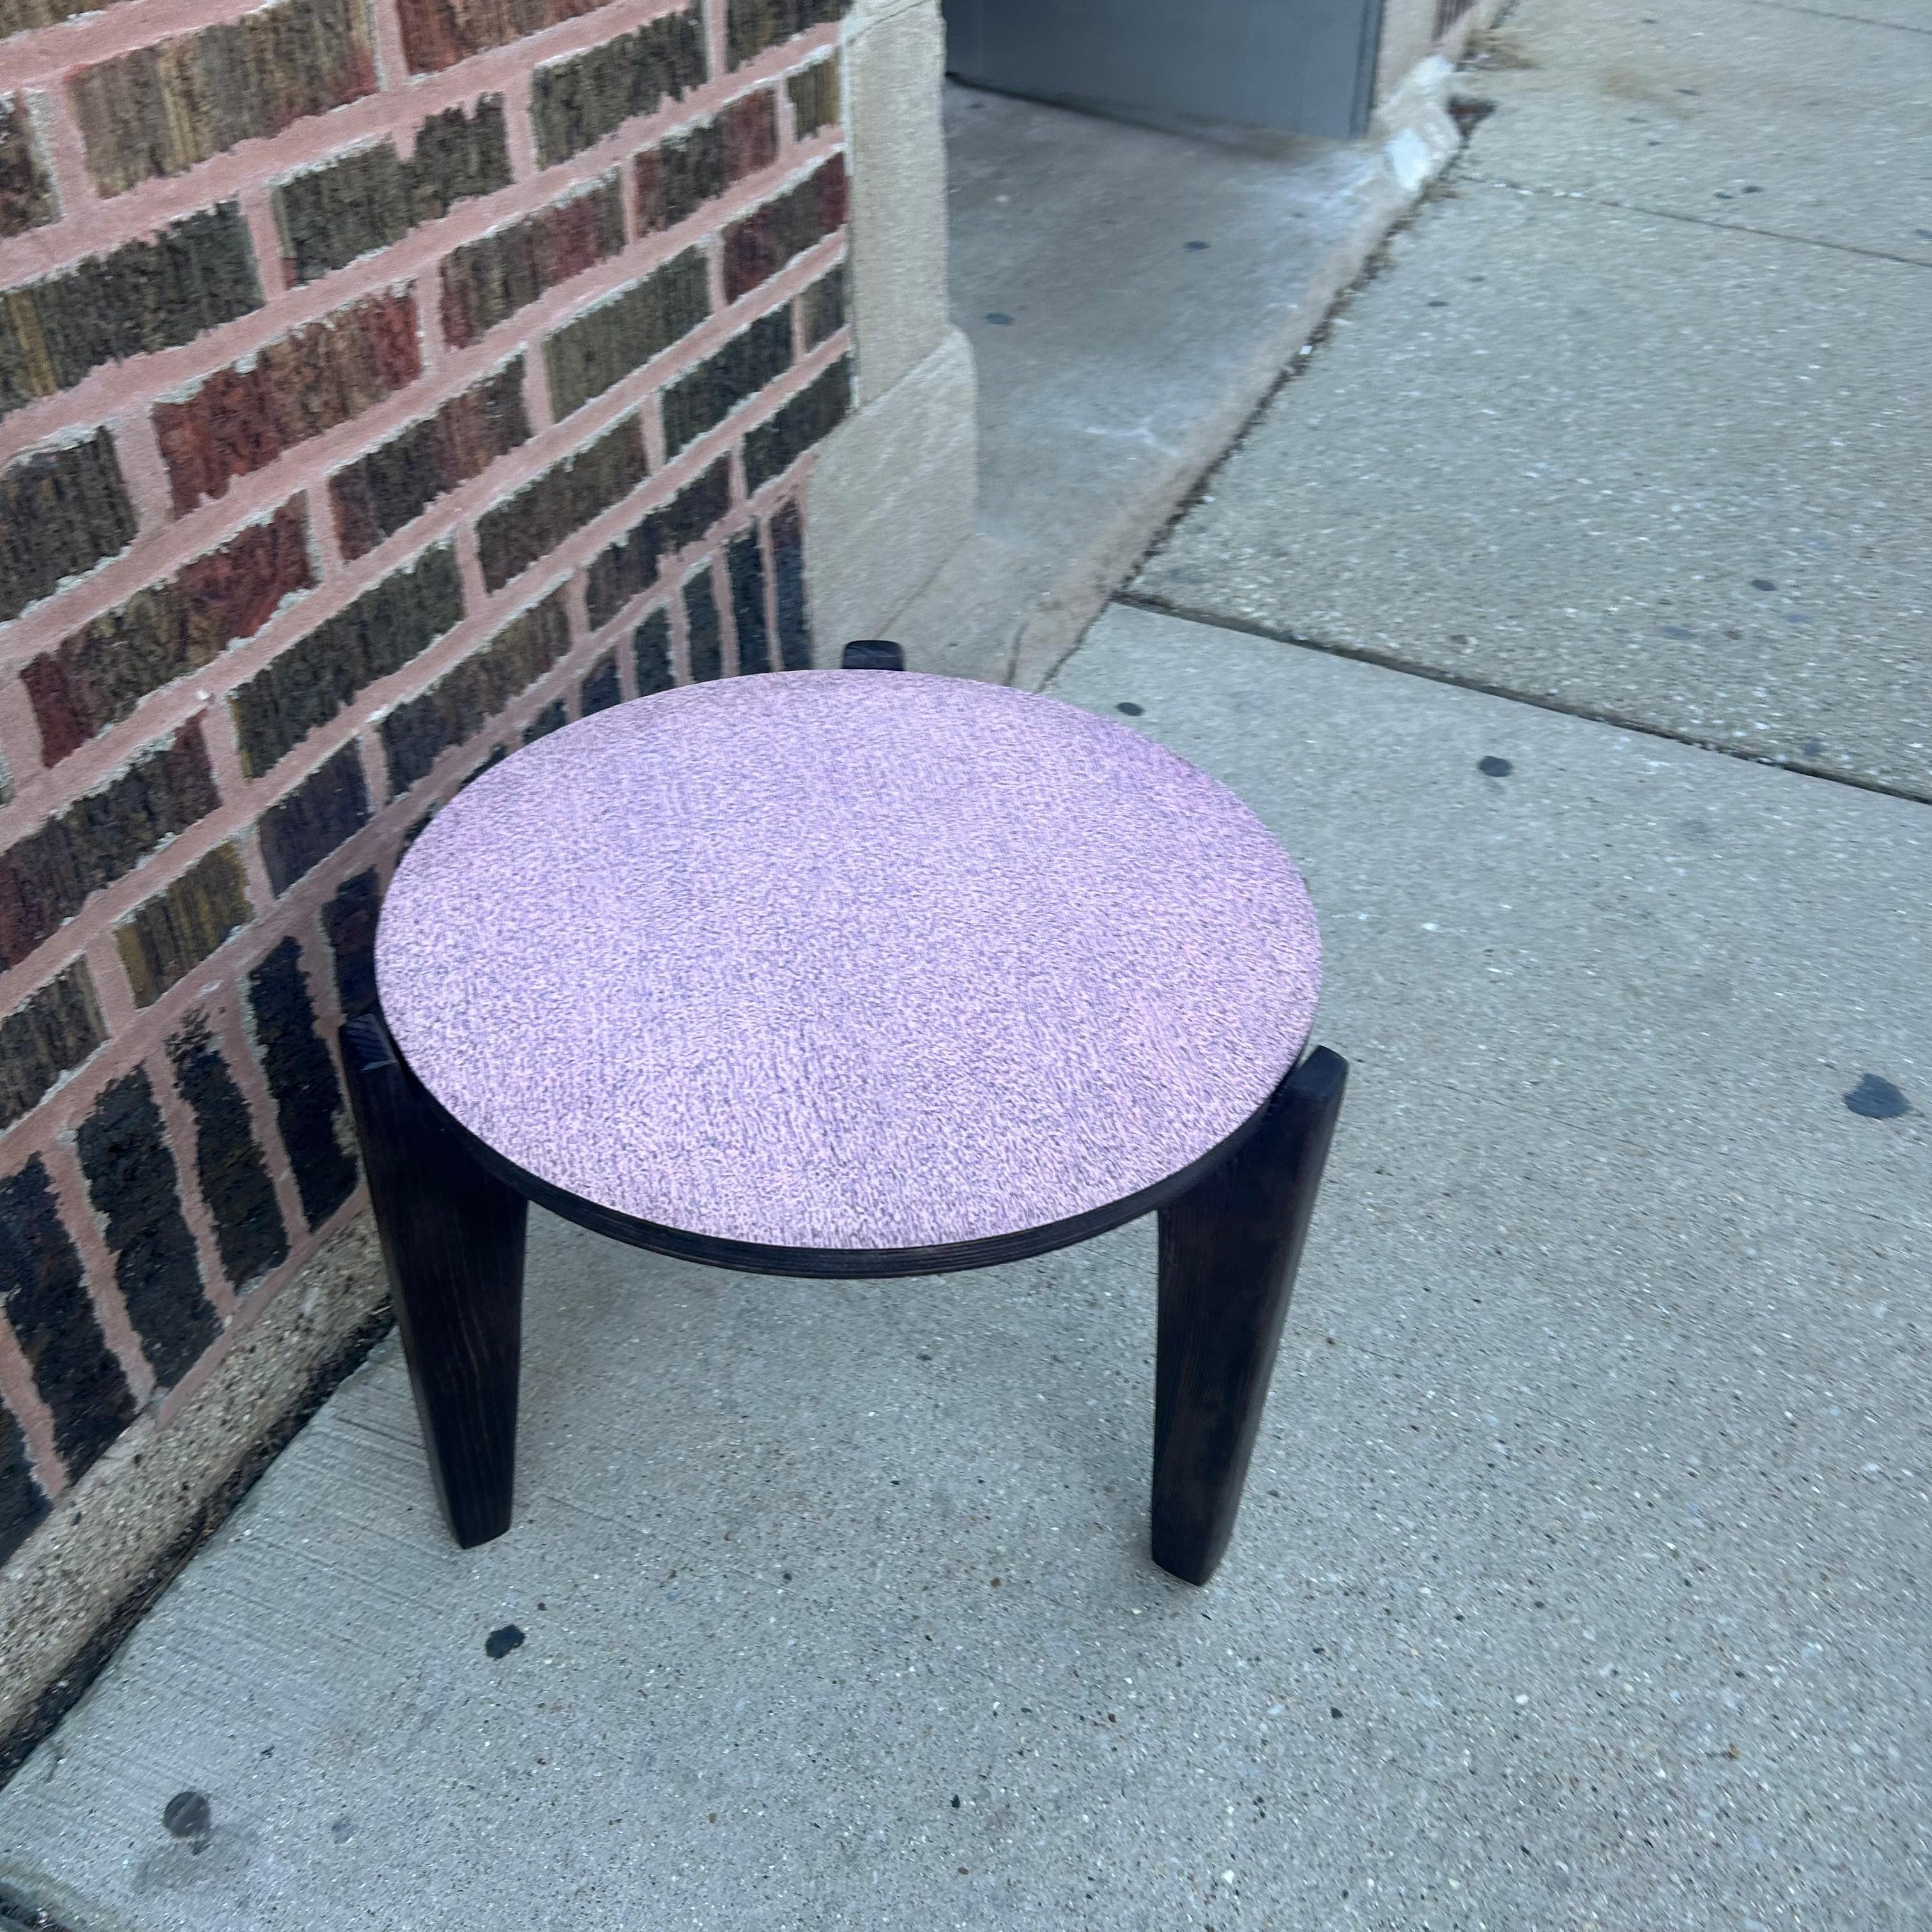 Fabulously vintage -- this pink laminate side table is ready to bring some retro vibes to your space. We love her bubblegum-hued top and MCM-style wooden legs.  The top was cut from a Mid-Century dining table that had suffered some significant